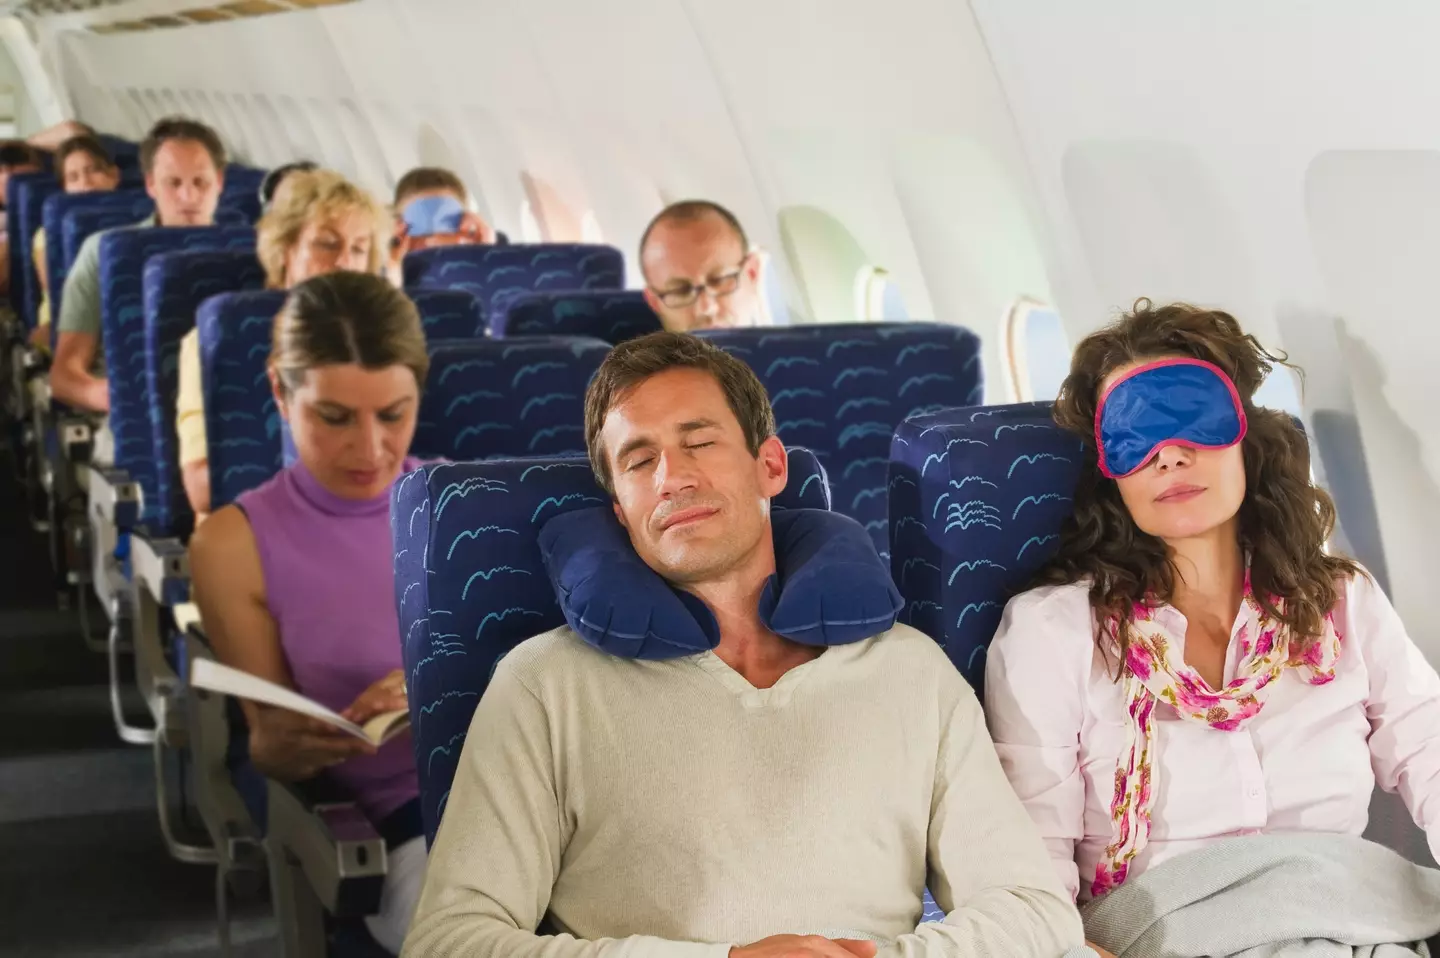 If you're going to sleep on a plane at least make sure it's taken off safely first. (Getty Stock Photo)